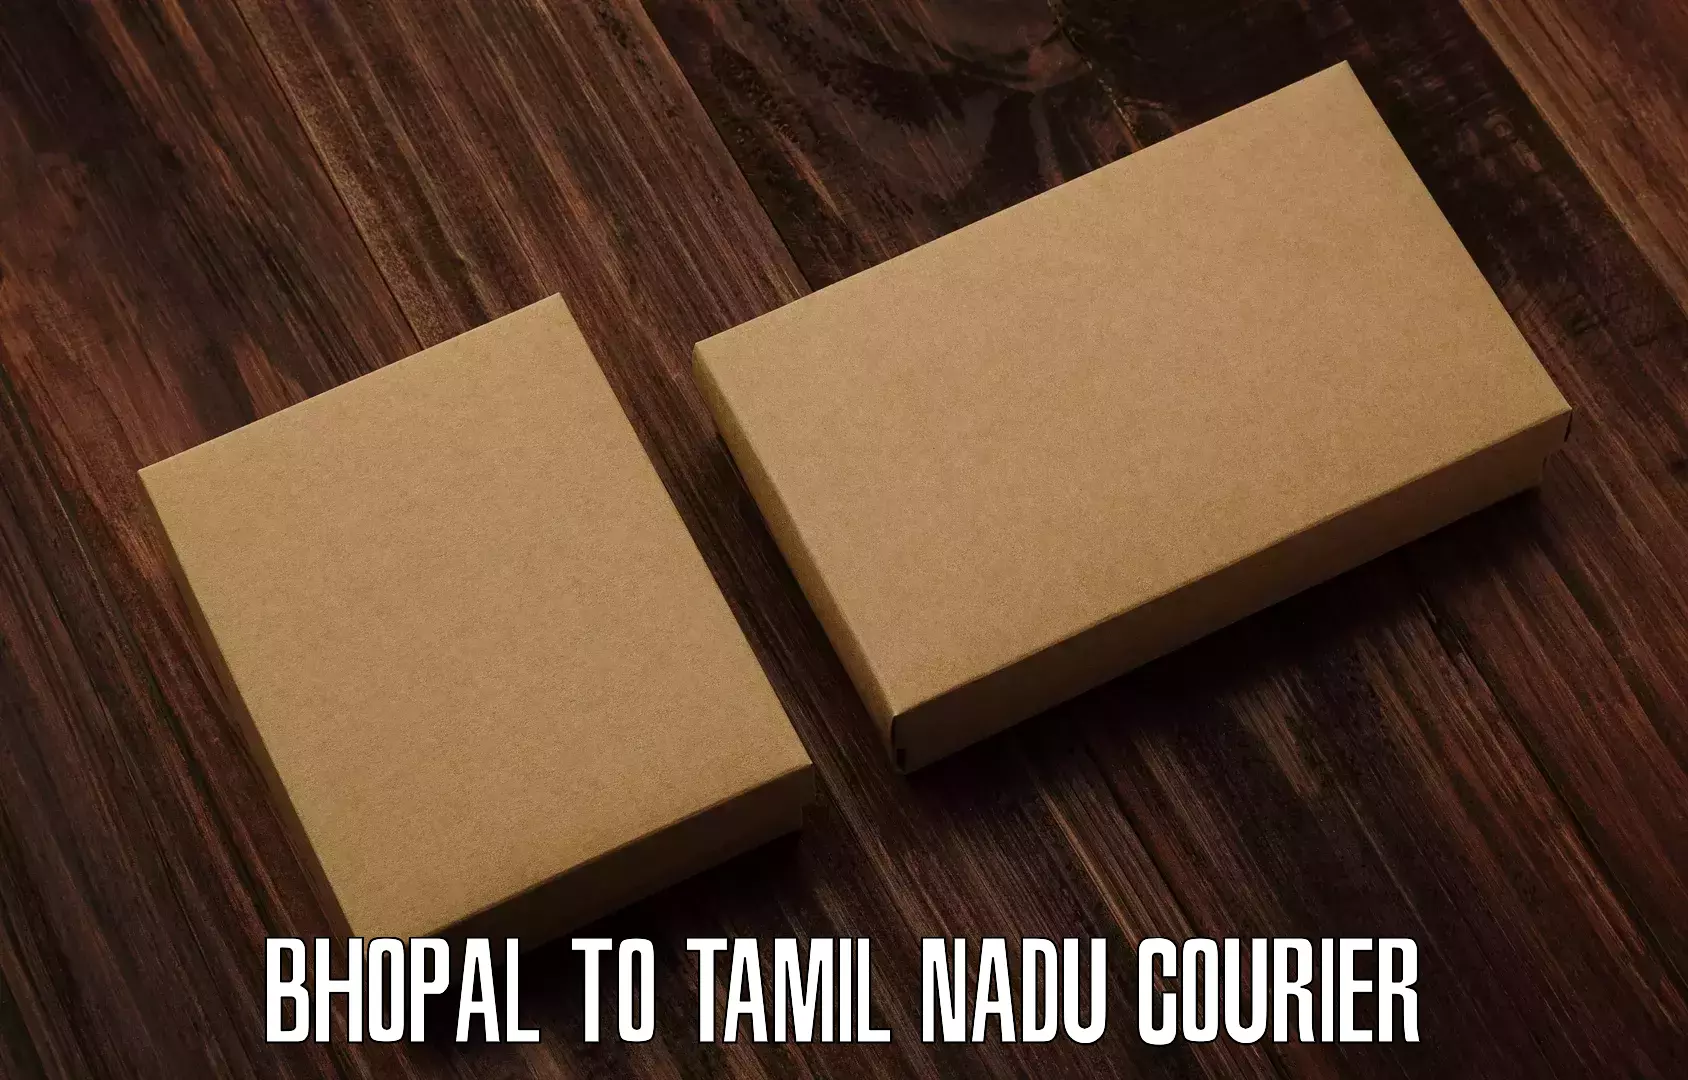 Modern delivery methods Bhopal to Perambalur